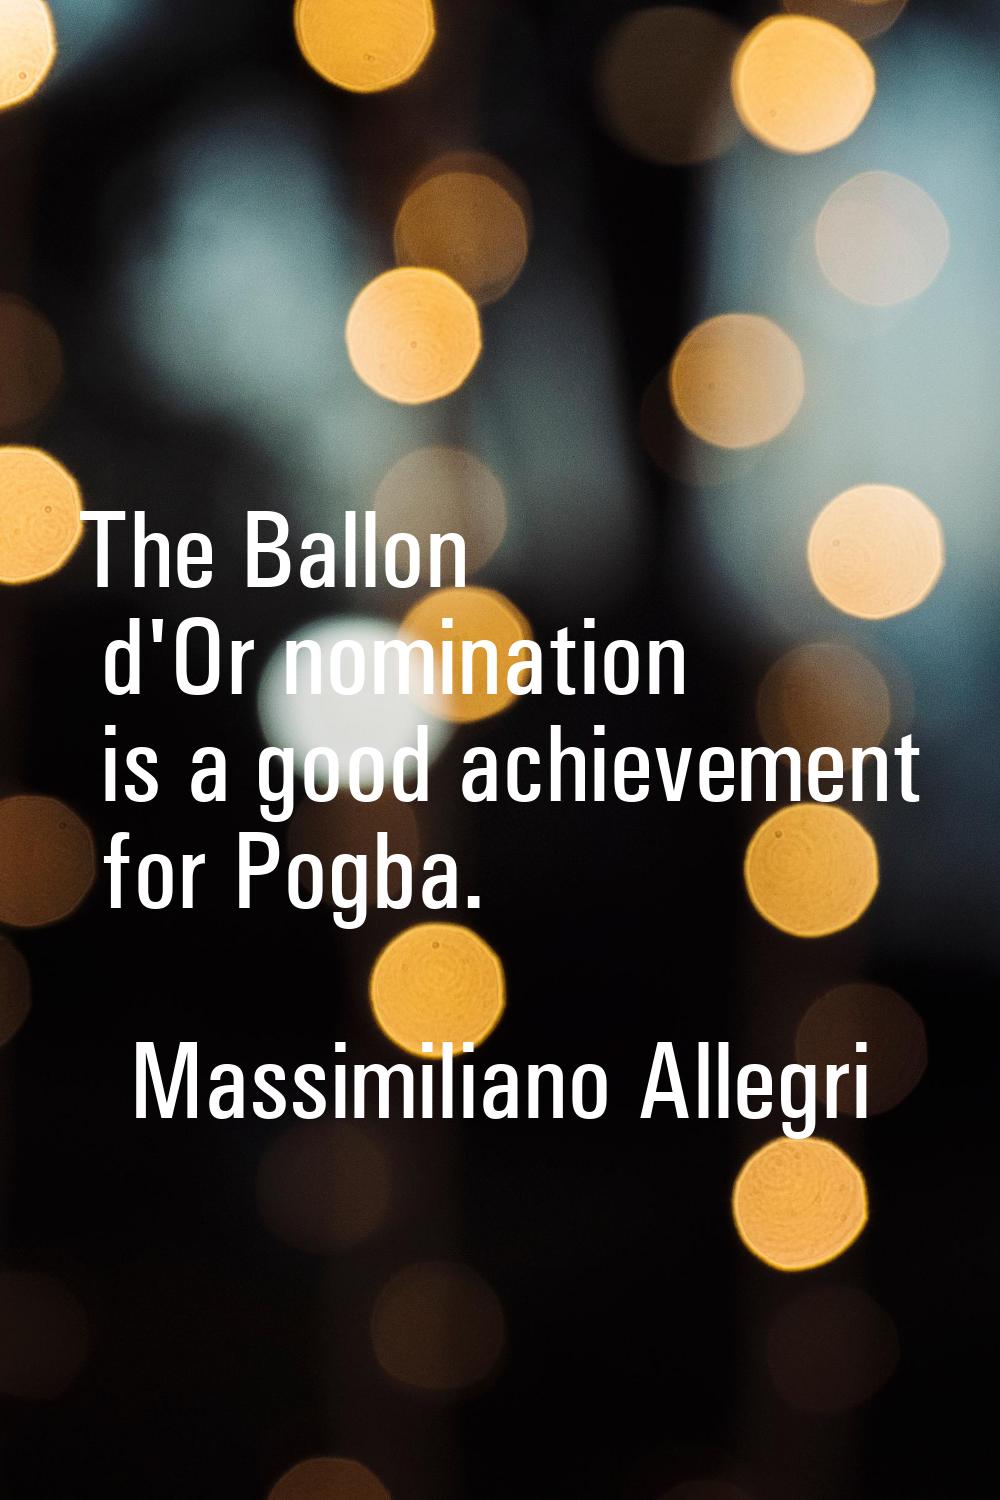 The Ballon d'Or nomination is a good achievement for Pogba.